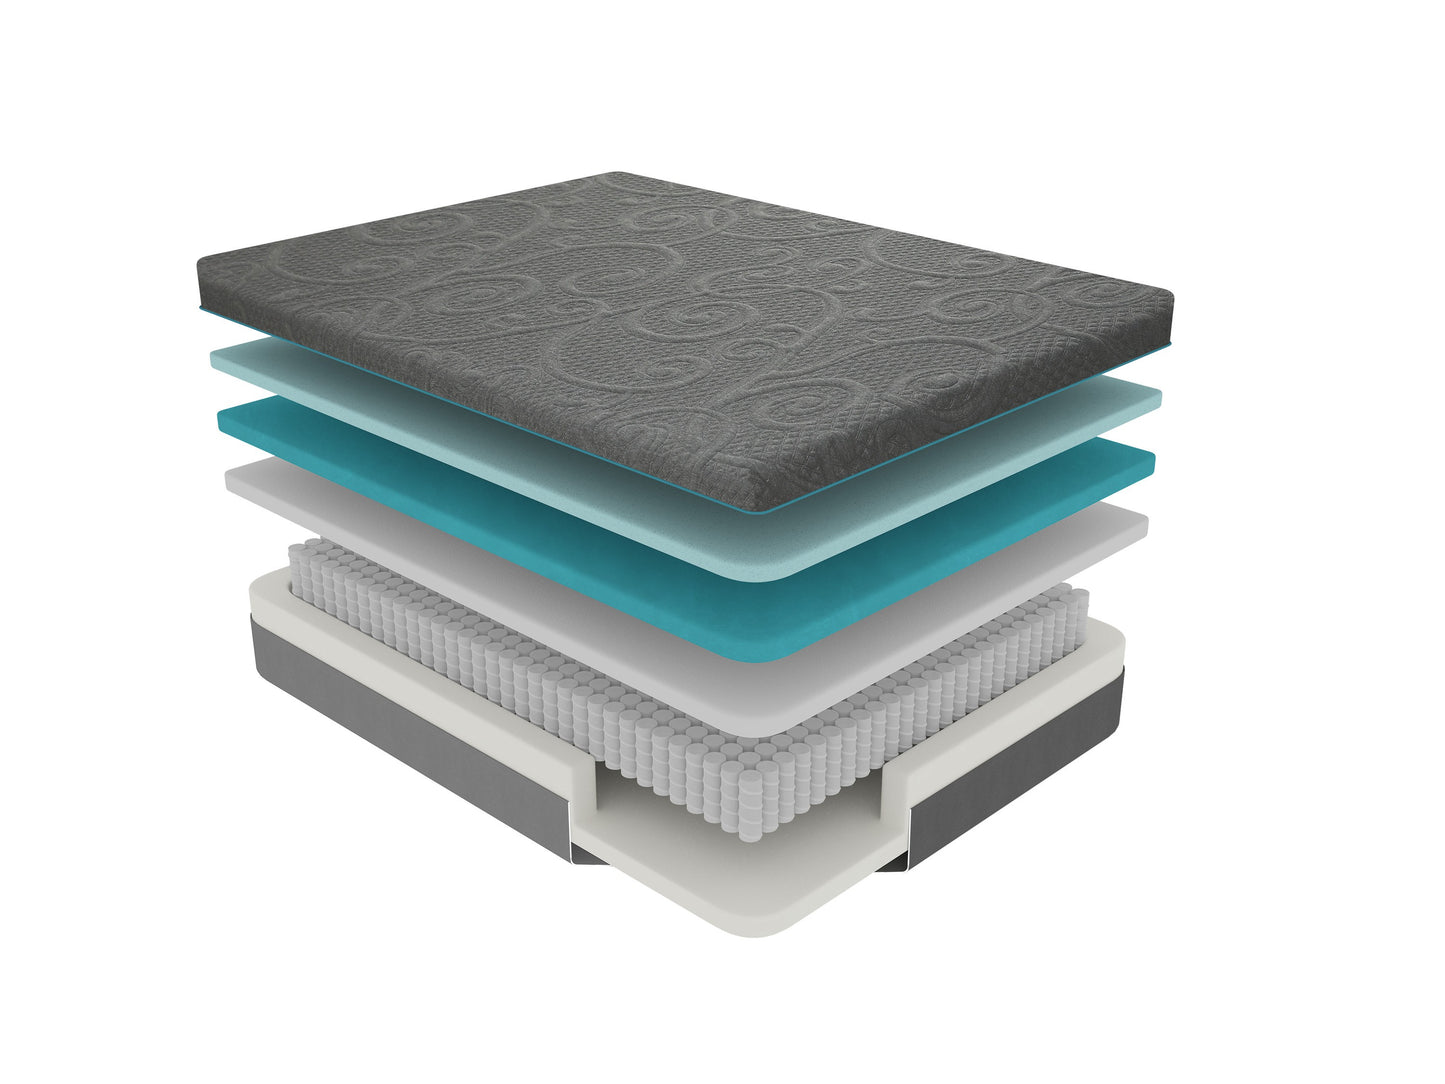 QUEEN 14'' Gel-Infused Memory Foam Hybrid-Mira Collection